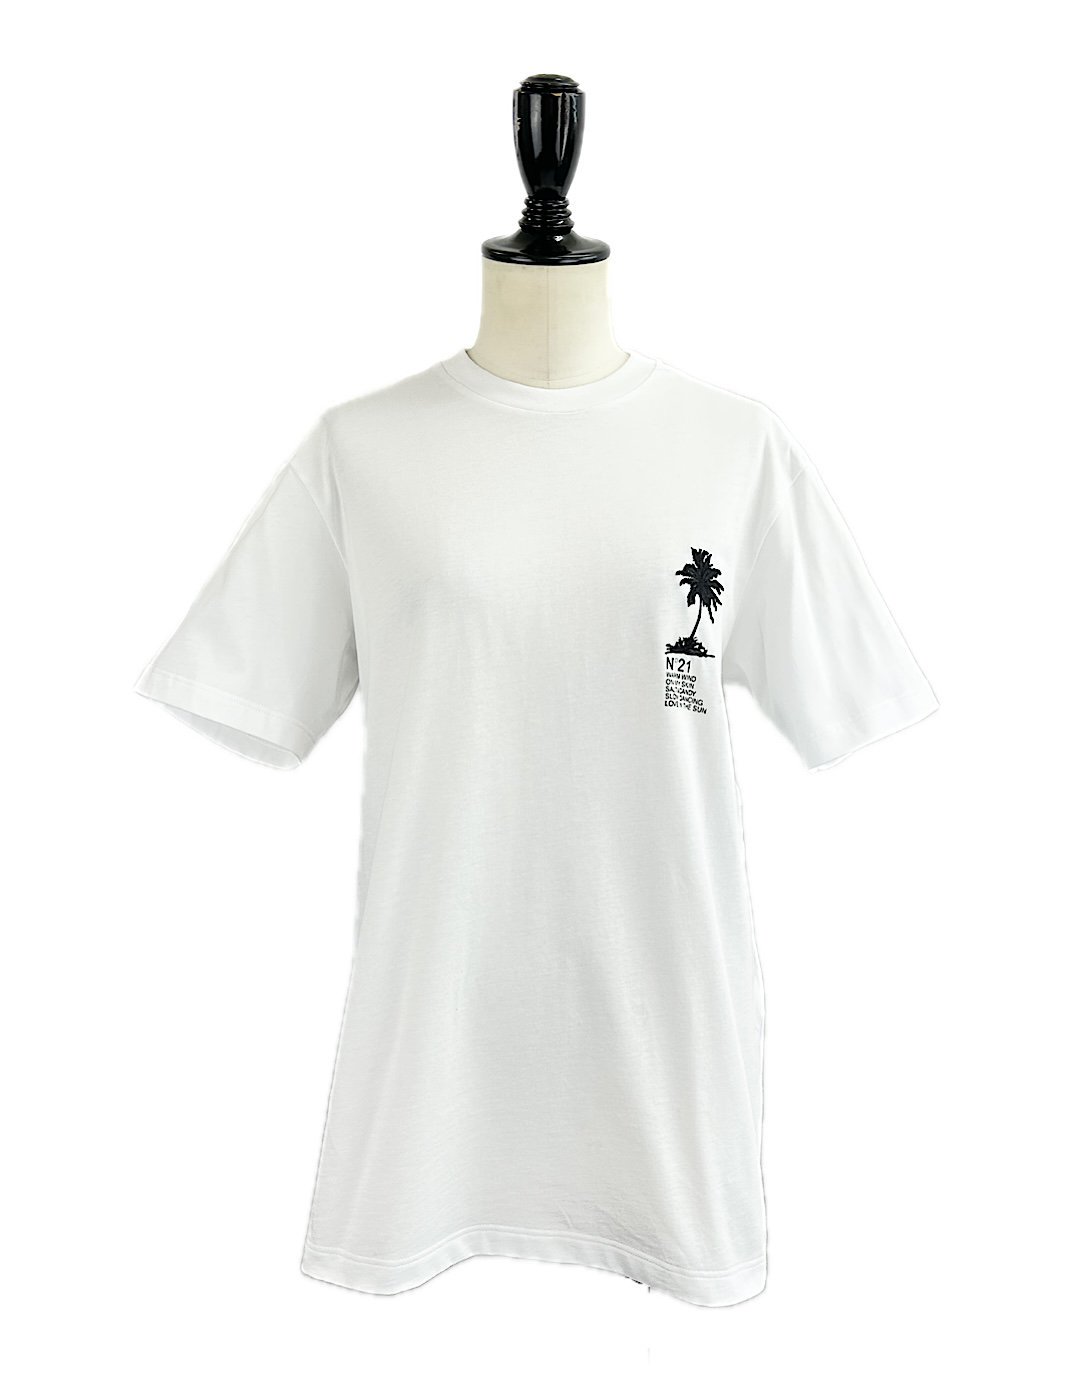 <img class='new_mark_img1' src='https://img.shop-pro.jp/img/new/icons47.gif' style='border:none;display:inline;margin:0px;padding:0px;width:auto;' />N21 / EMBROIDERY T-SHIRT